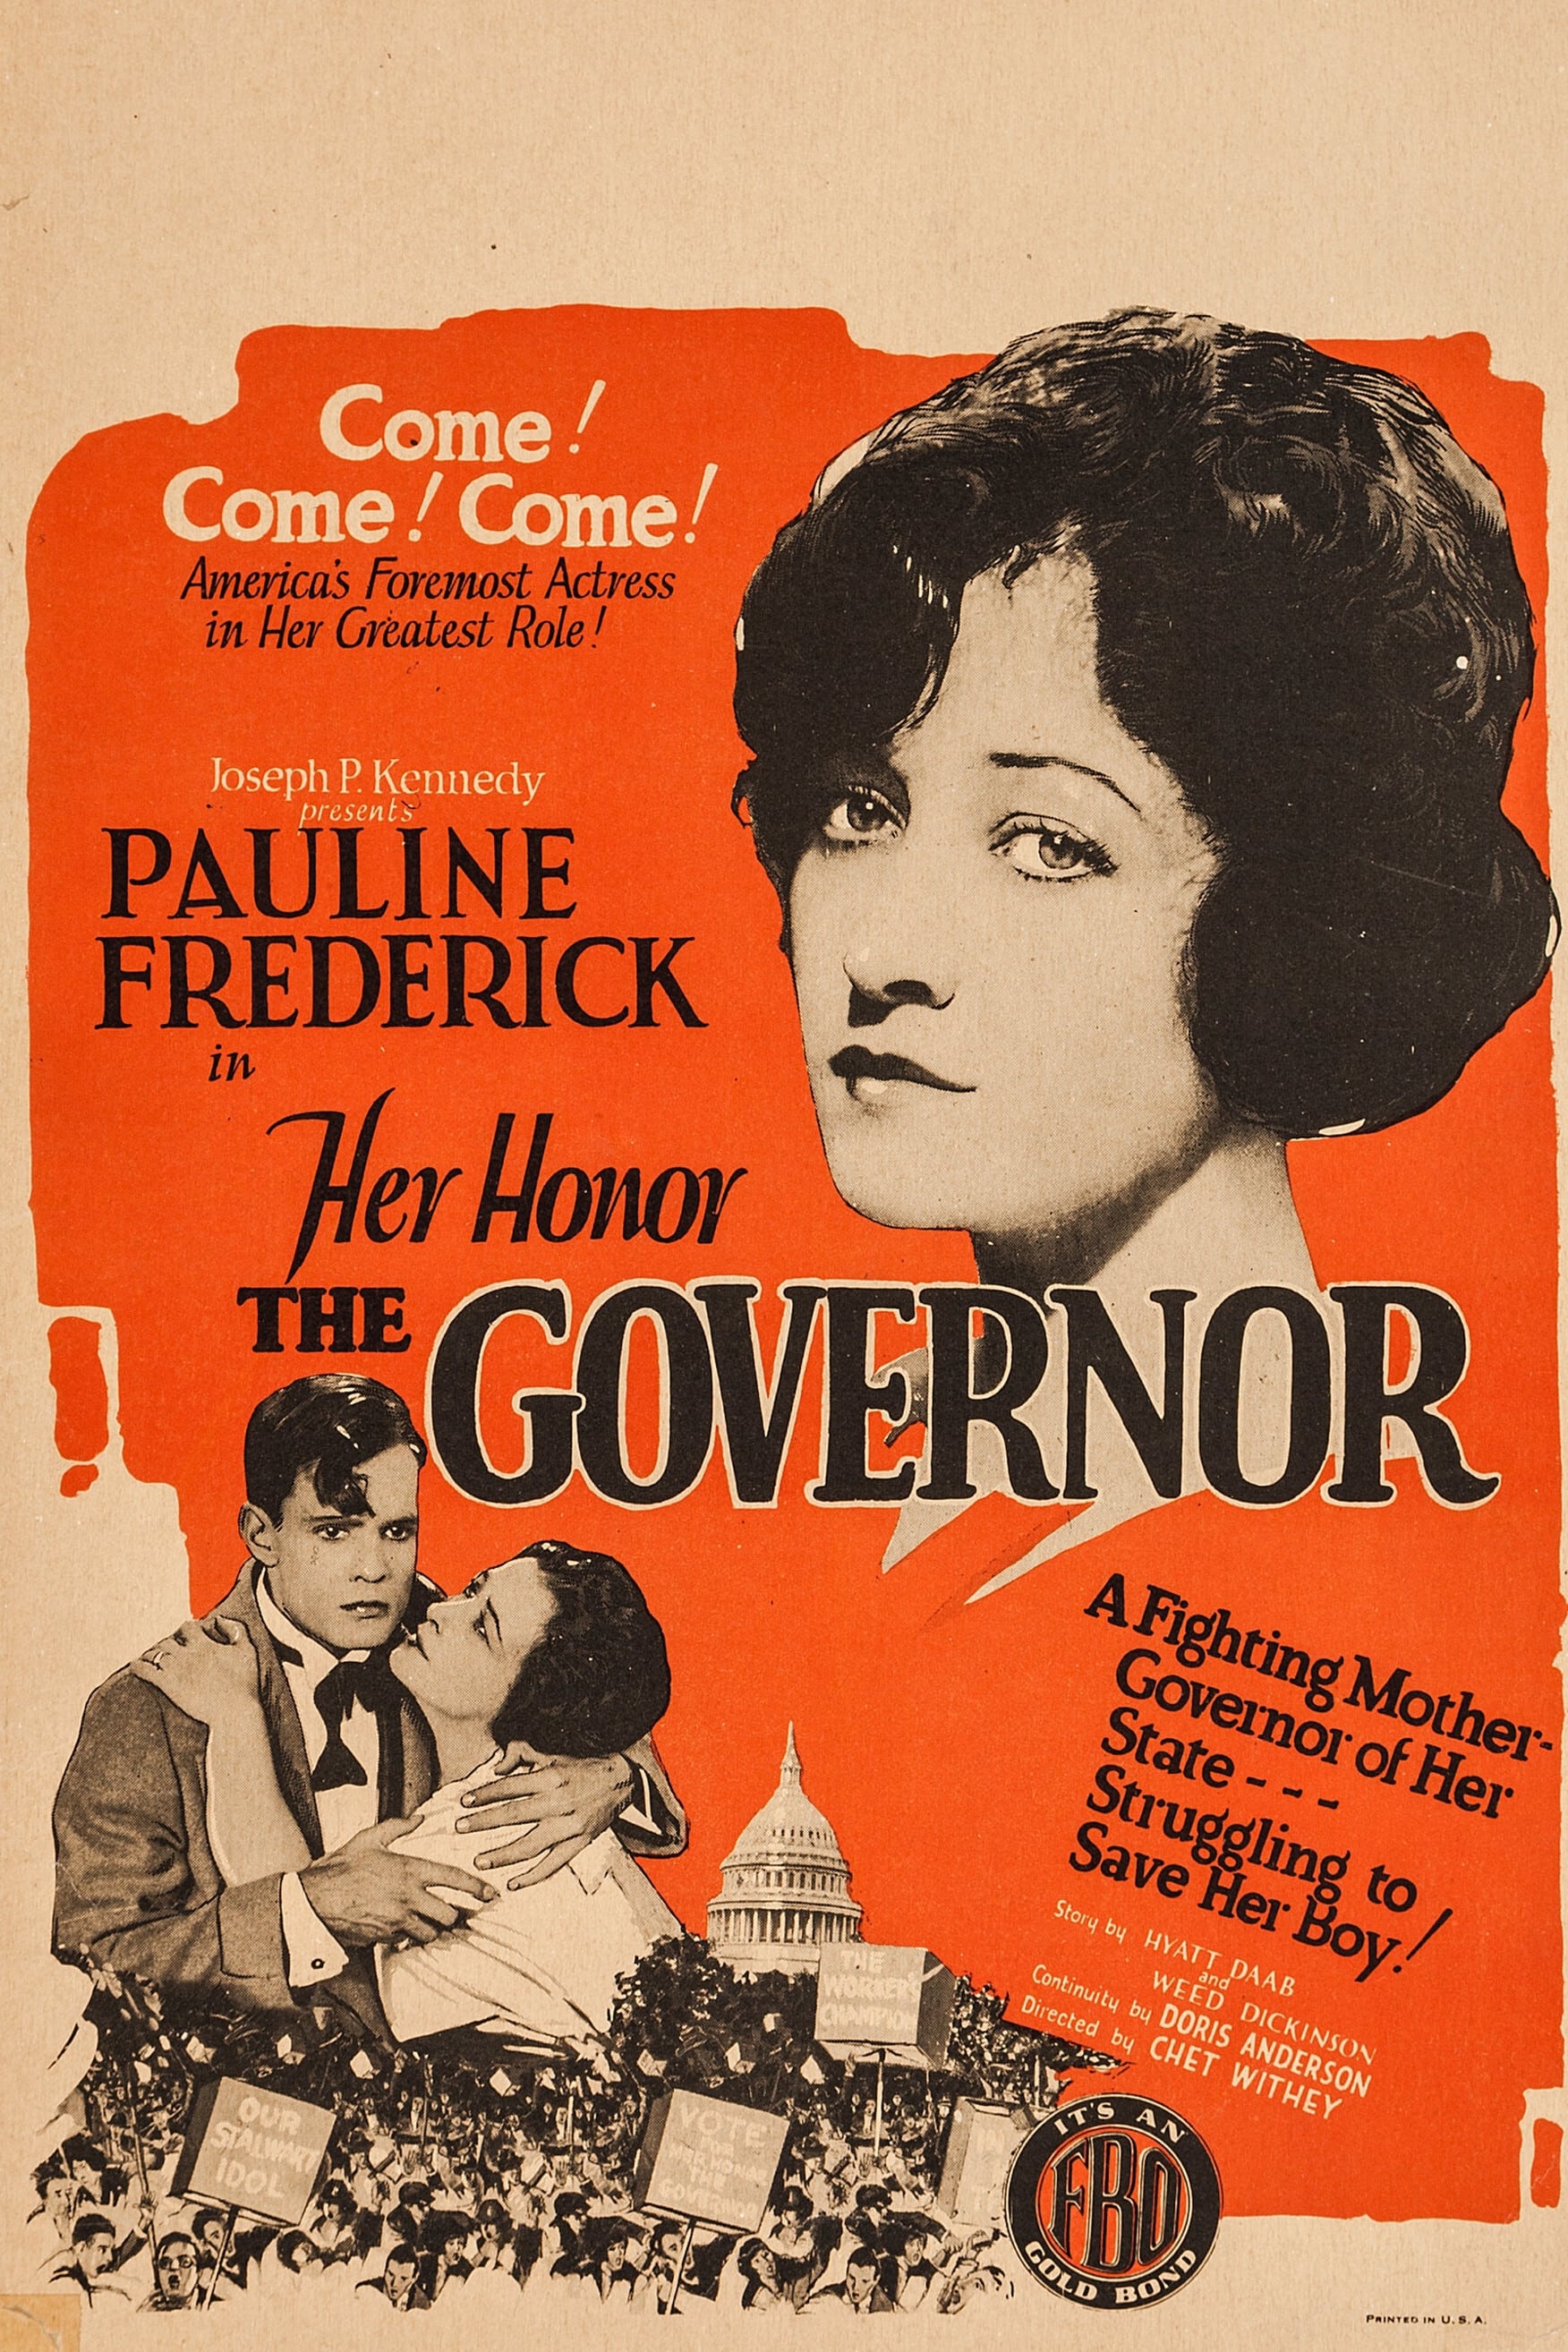 Her Honor, the Governor